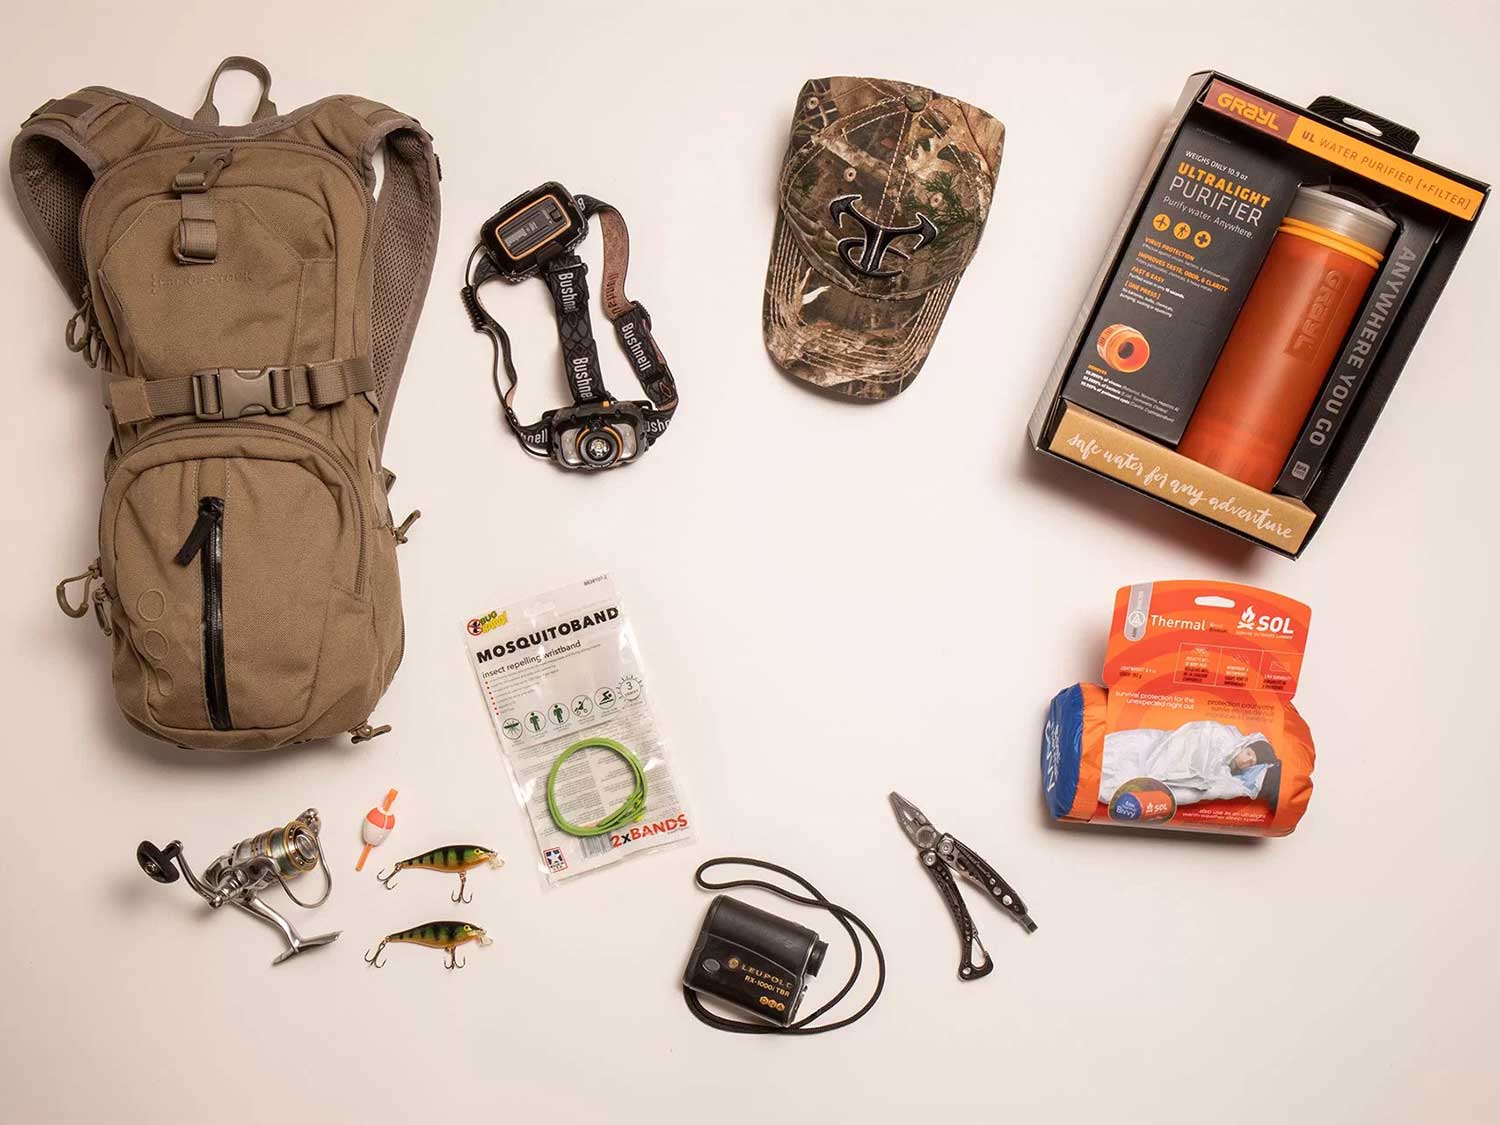 5 Reasons Outdoor Gear Subscription Boxes Make Great Gifts